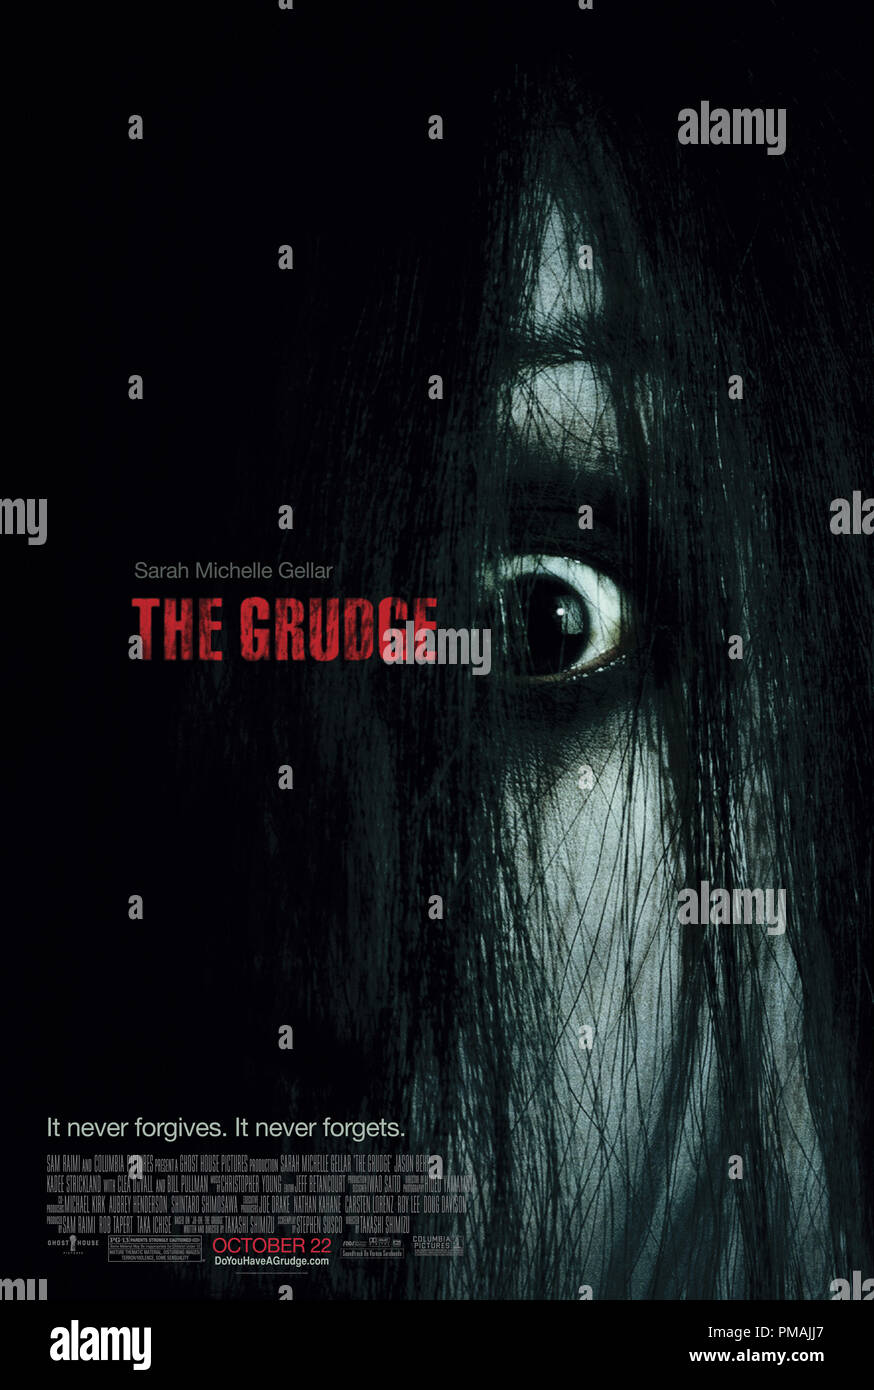 'The Grudge' (2004) Poster Stock Photo